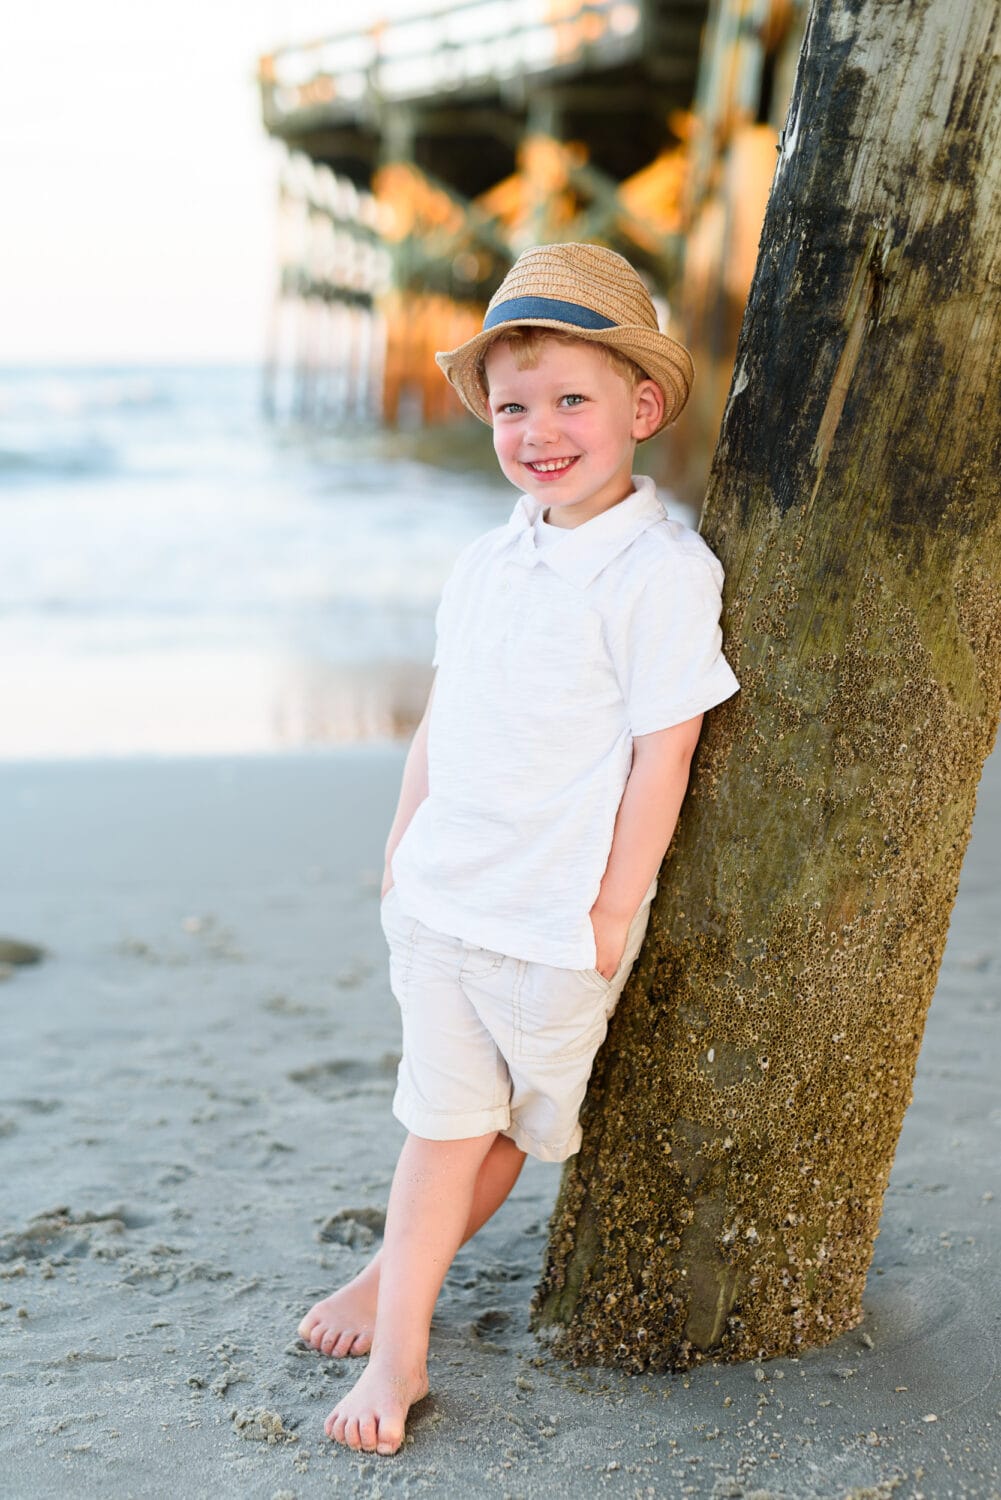 Happy boy standing by the pier - Cherry Grove Pier